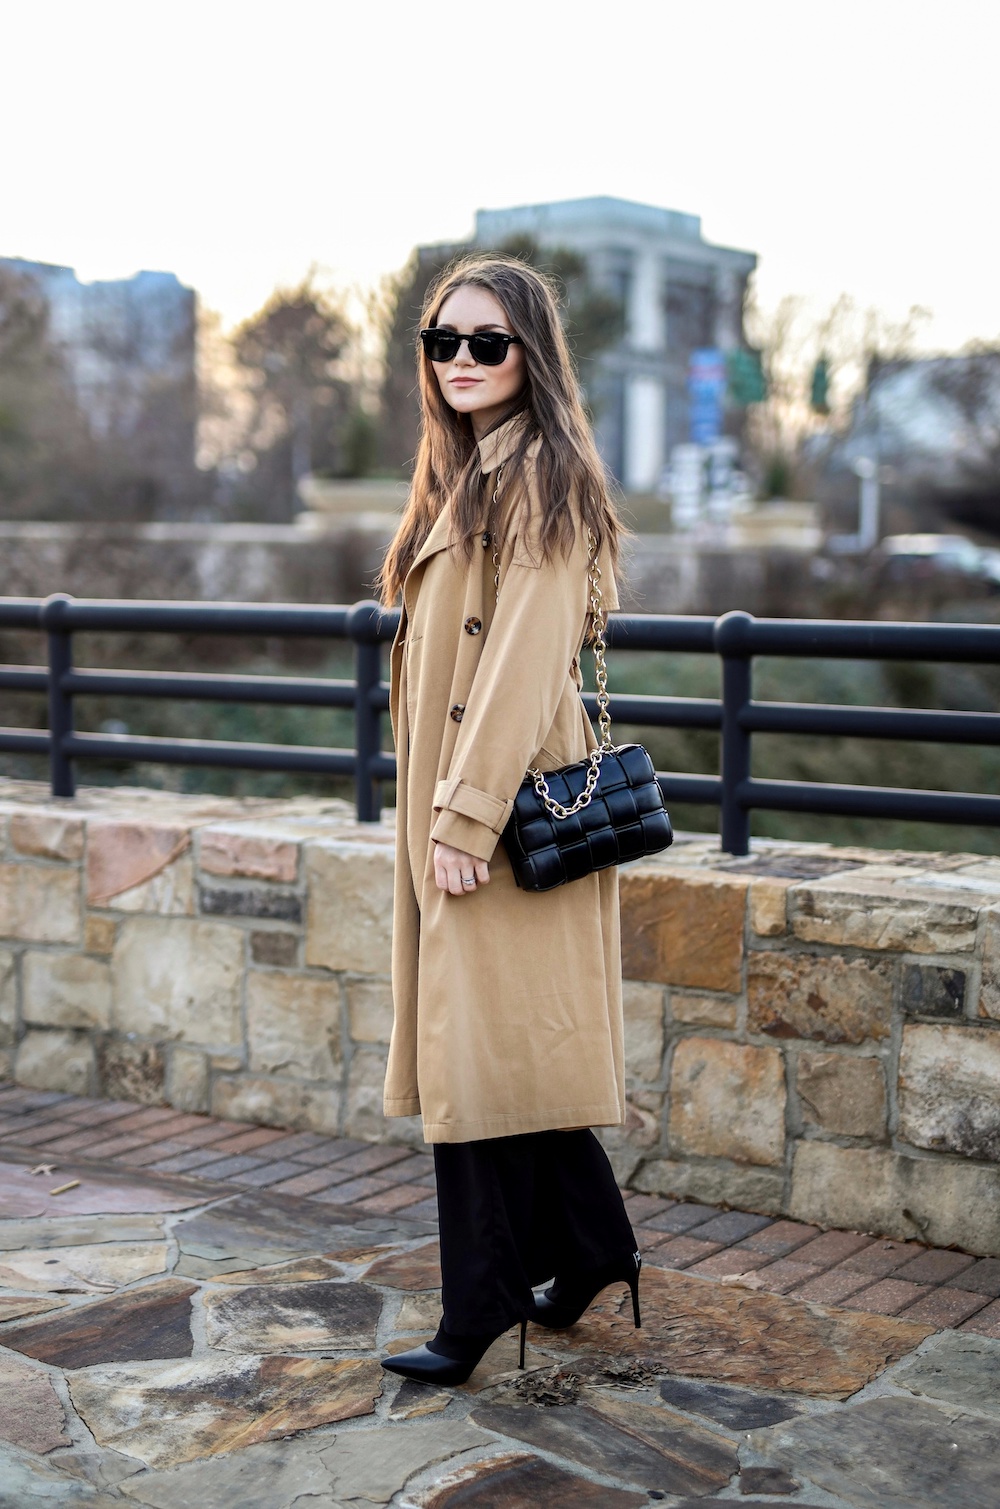 7 Easy Ways To Wear A Trench Coat - SimplyByKristina